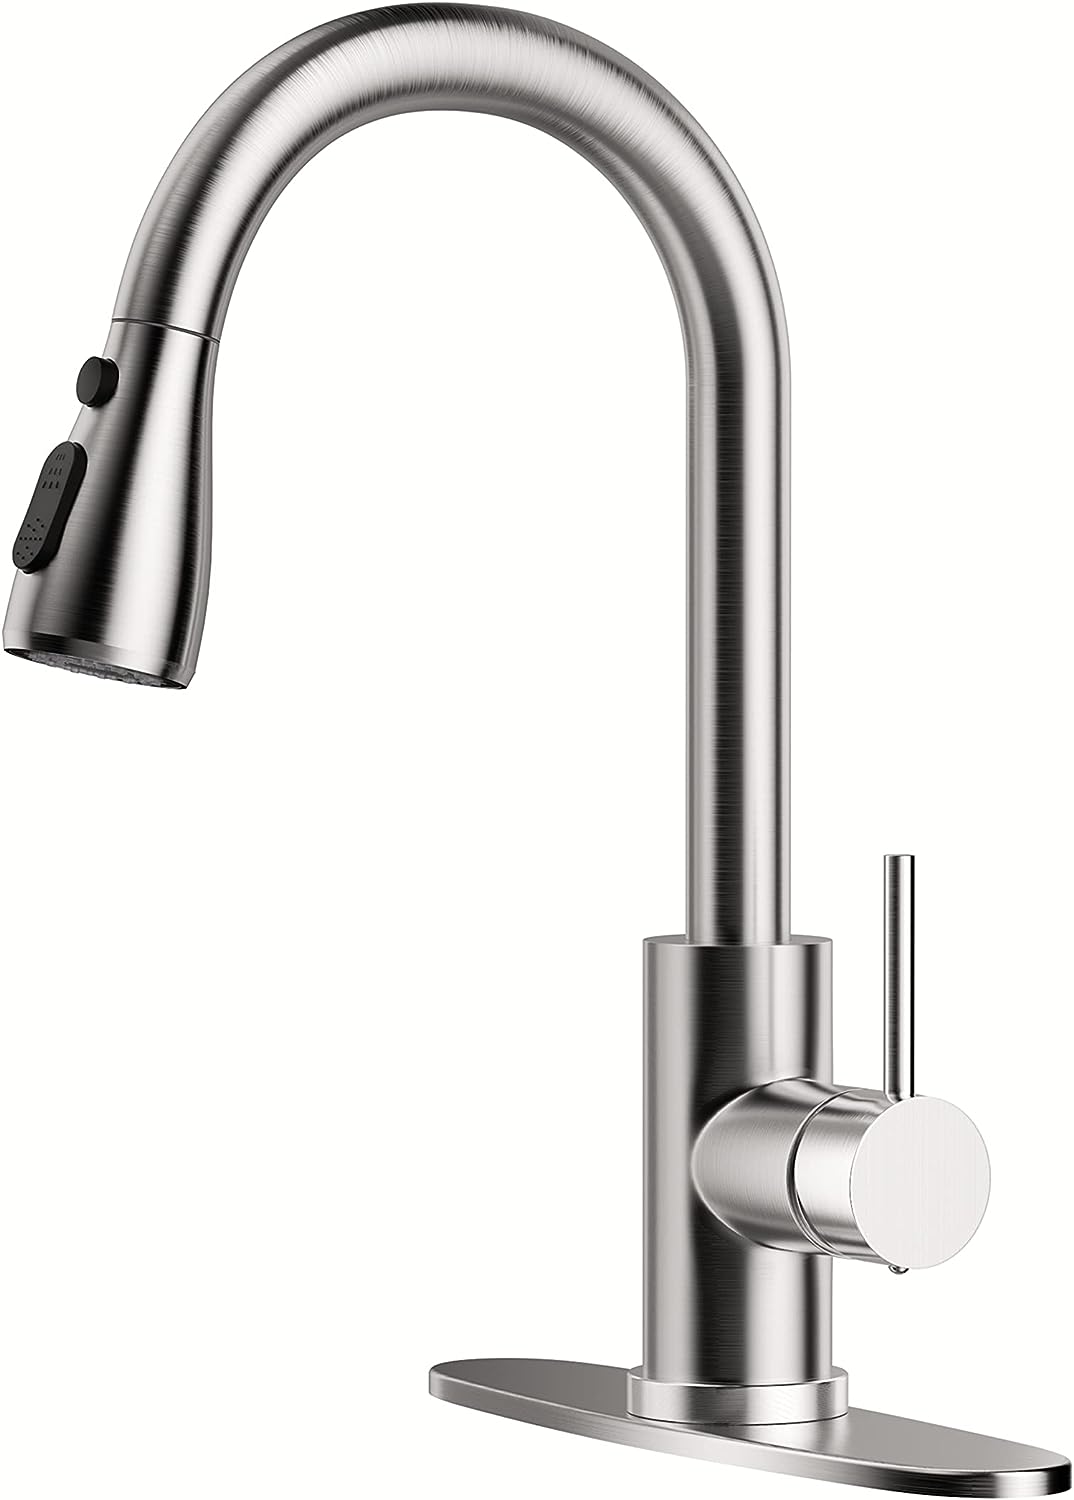 Kitchen Faucet with Pull-Down Spray Single Handle high [...]